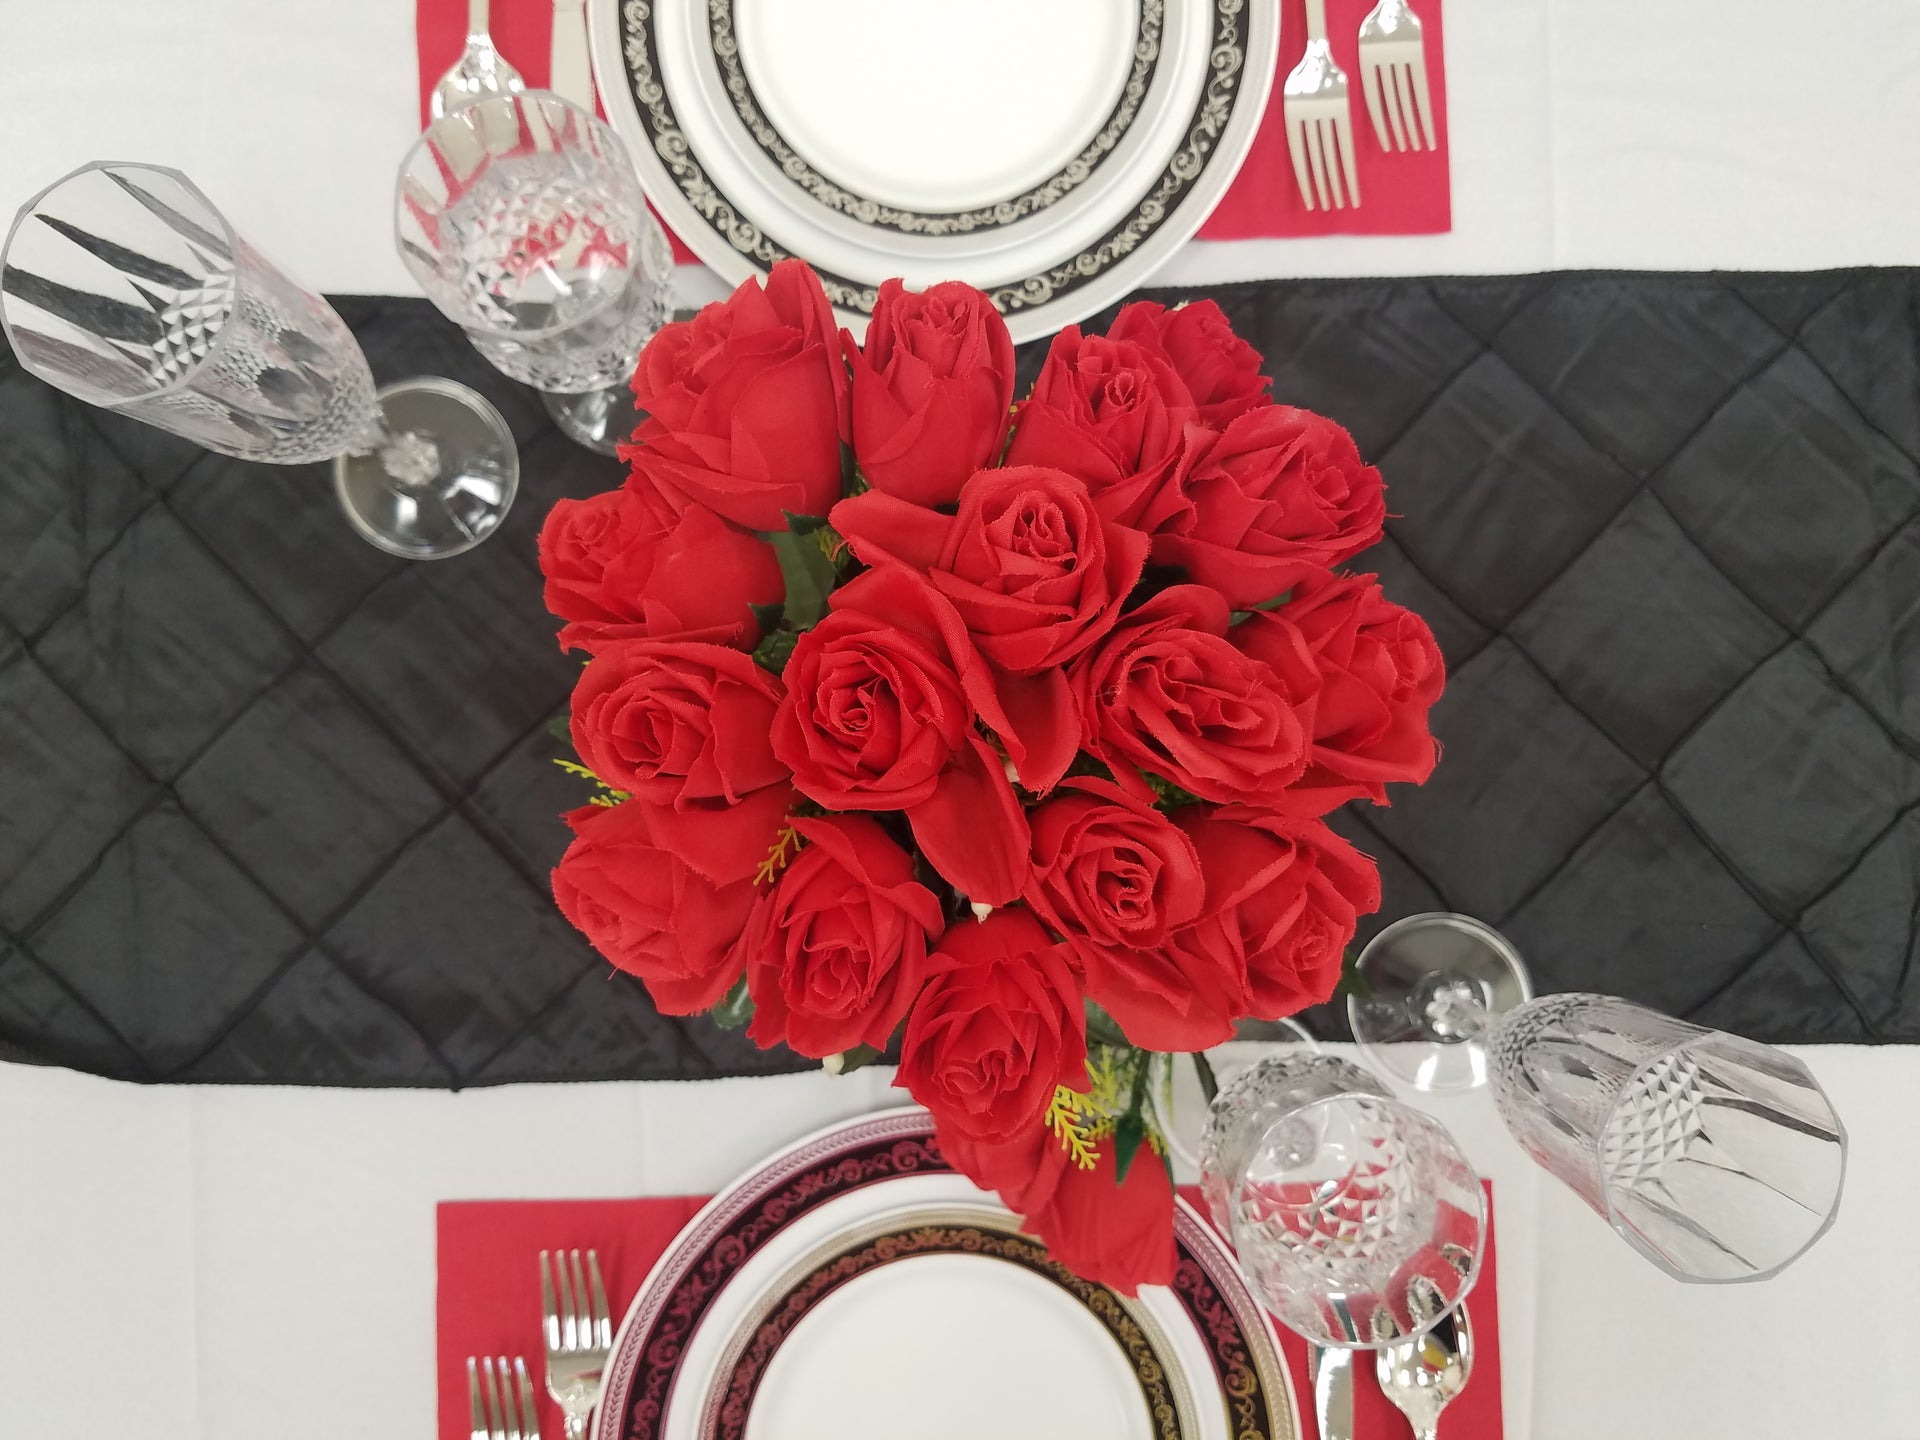 The Ultimate Guide to a Romantic and Intimate Valentine's Day Table Setting